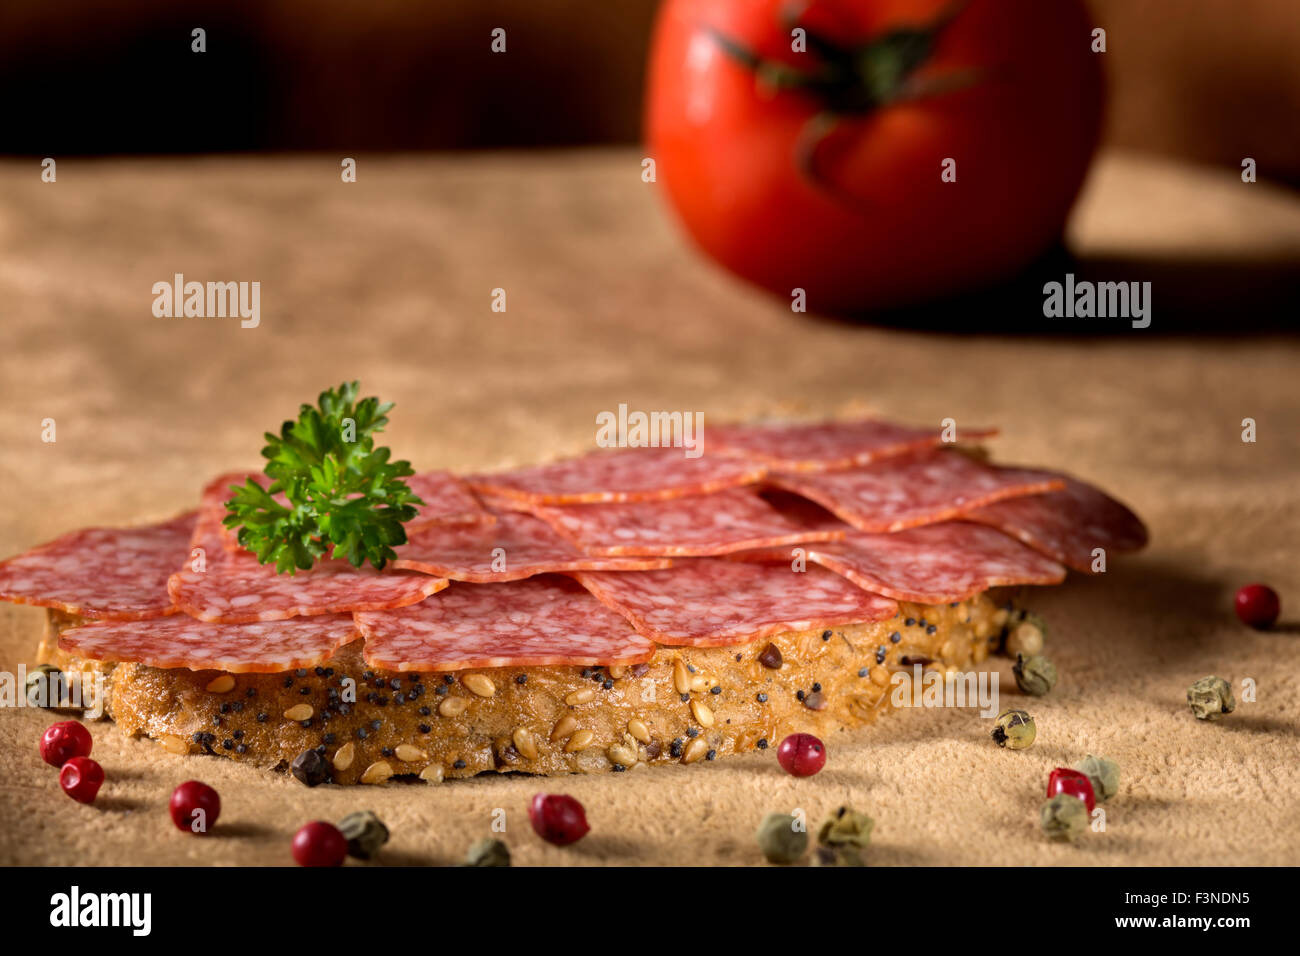 Photo of delicious salami sandwich with peppercorns and parsley Stock Photo